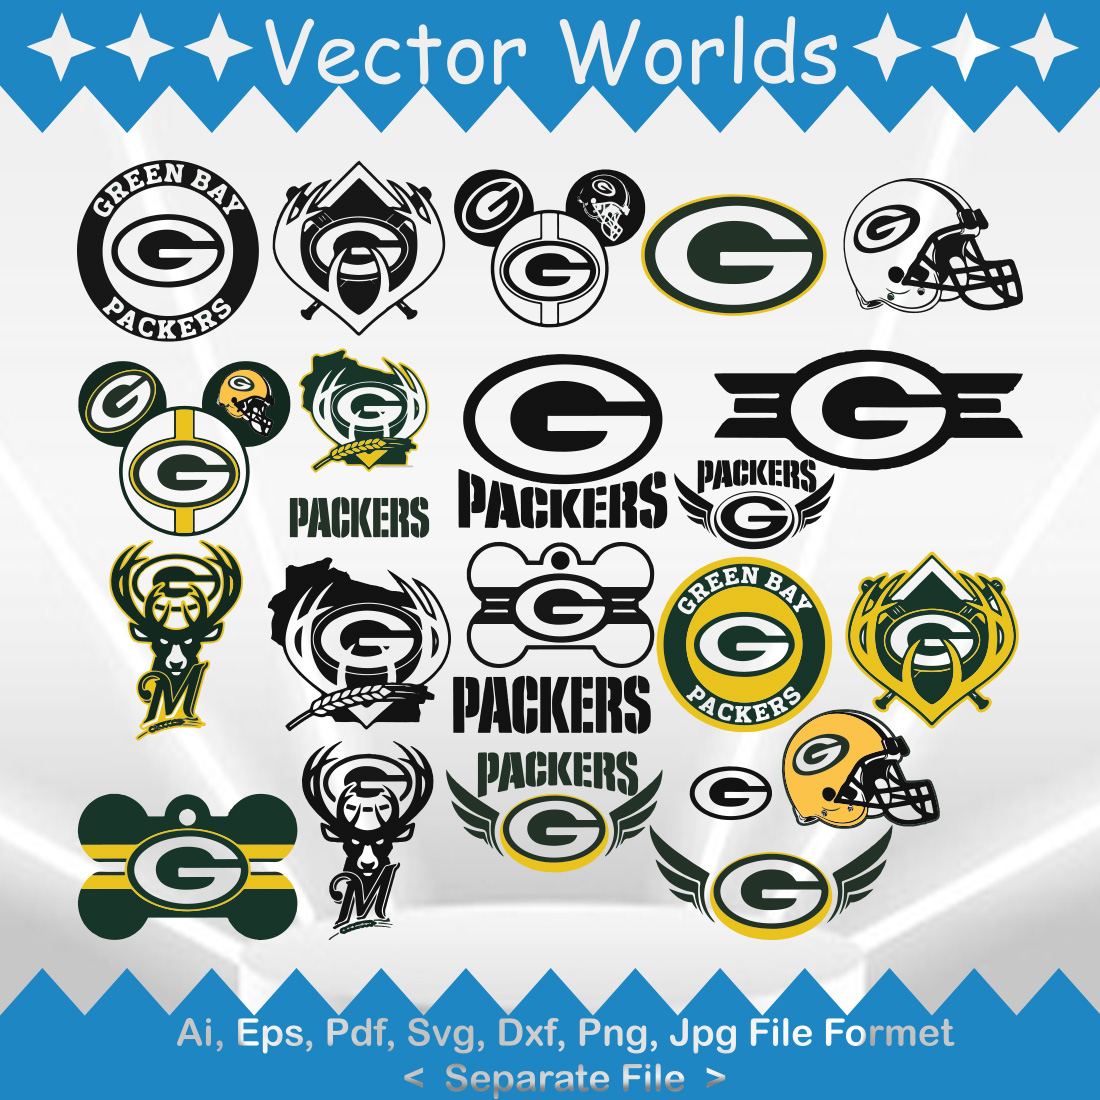 Green Bay Packers SVG Vector Design cover image.